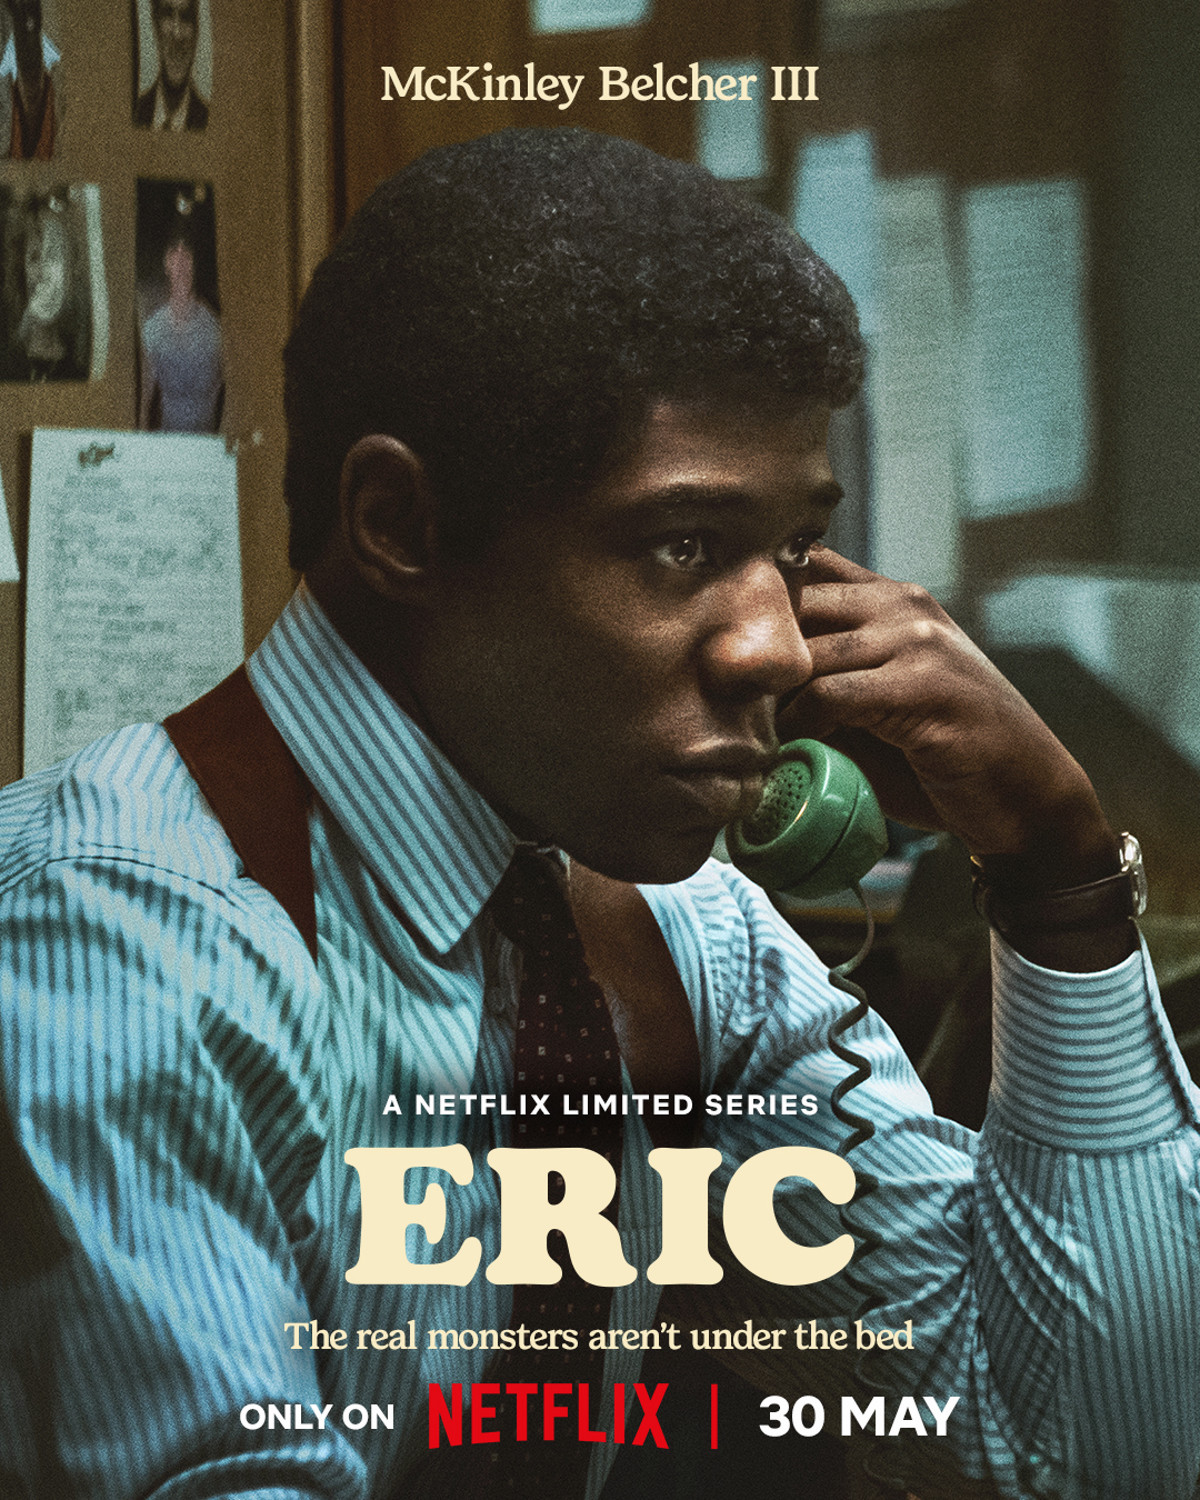 Promo poster for "Eric" featuring McKinley Belcher, courtesy of Netflix